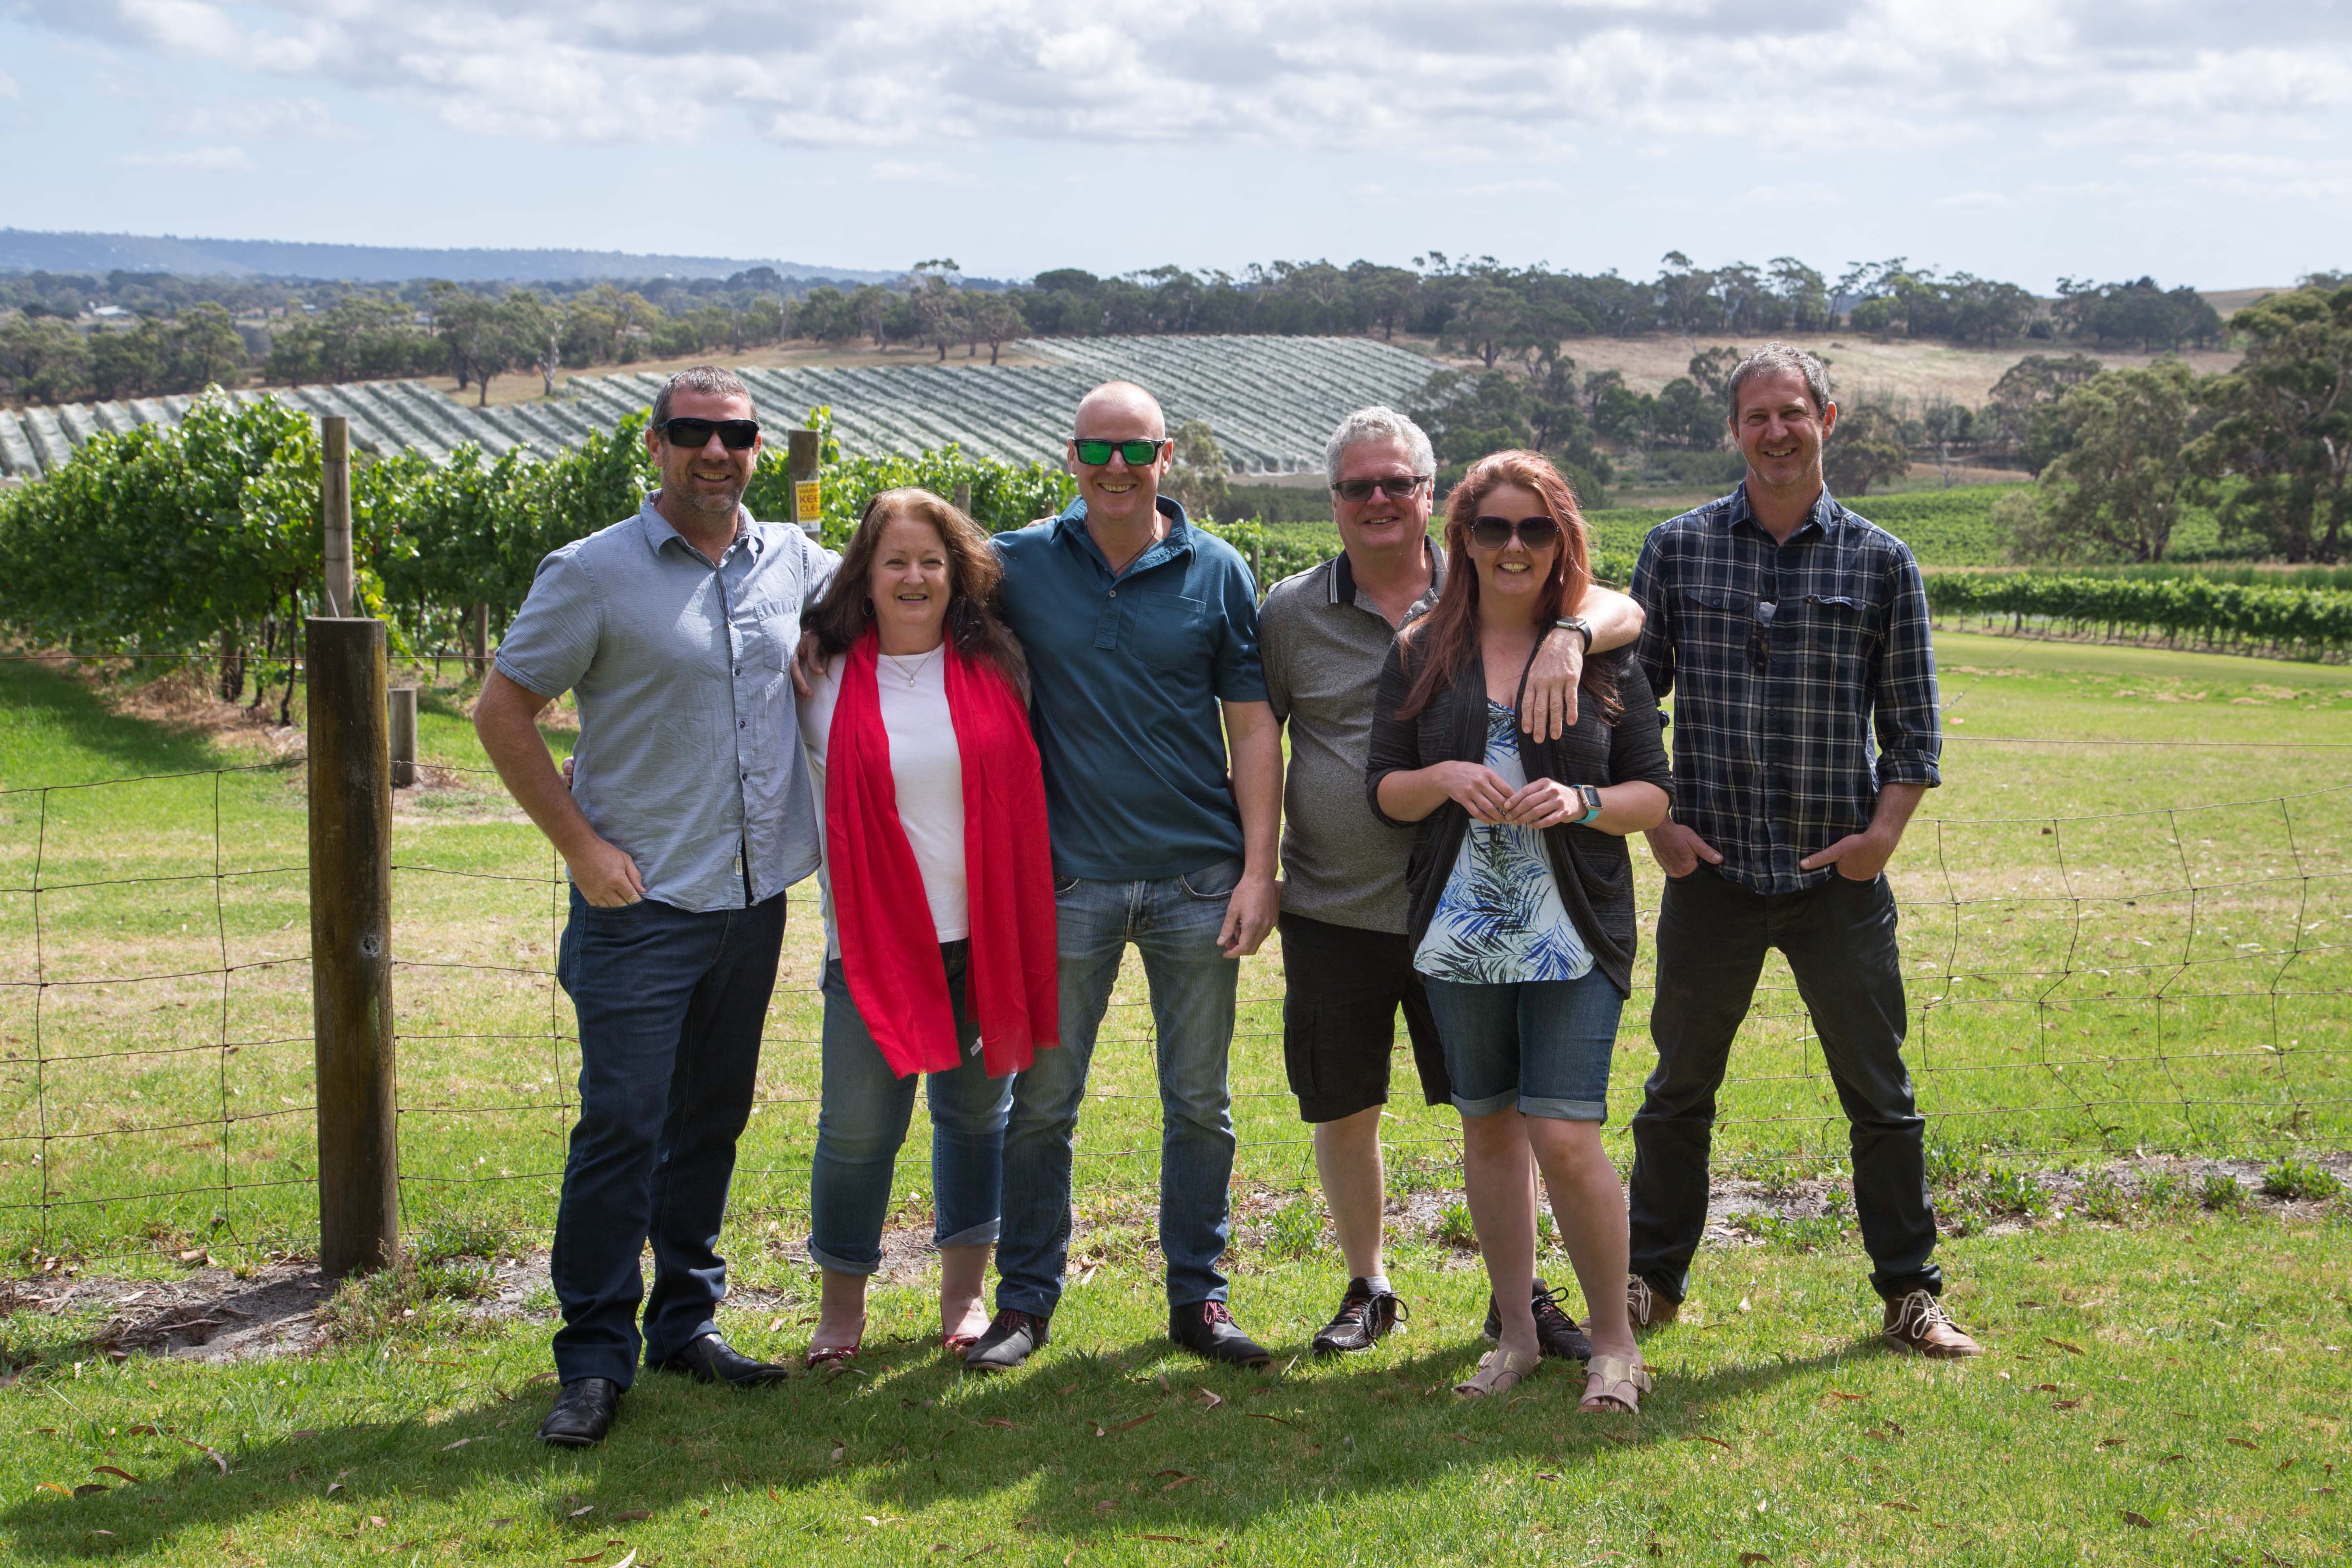 Group photo in front of the vines of Yabby Lake Vineyard